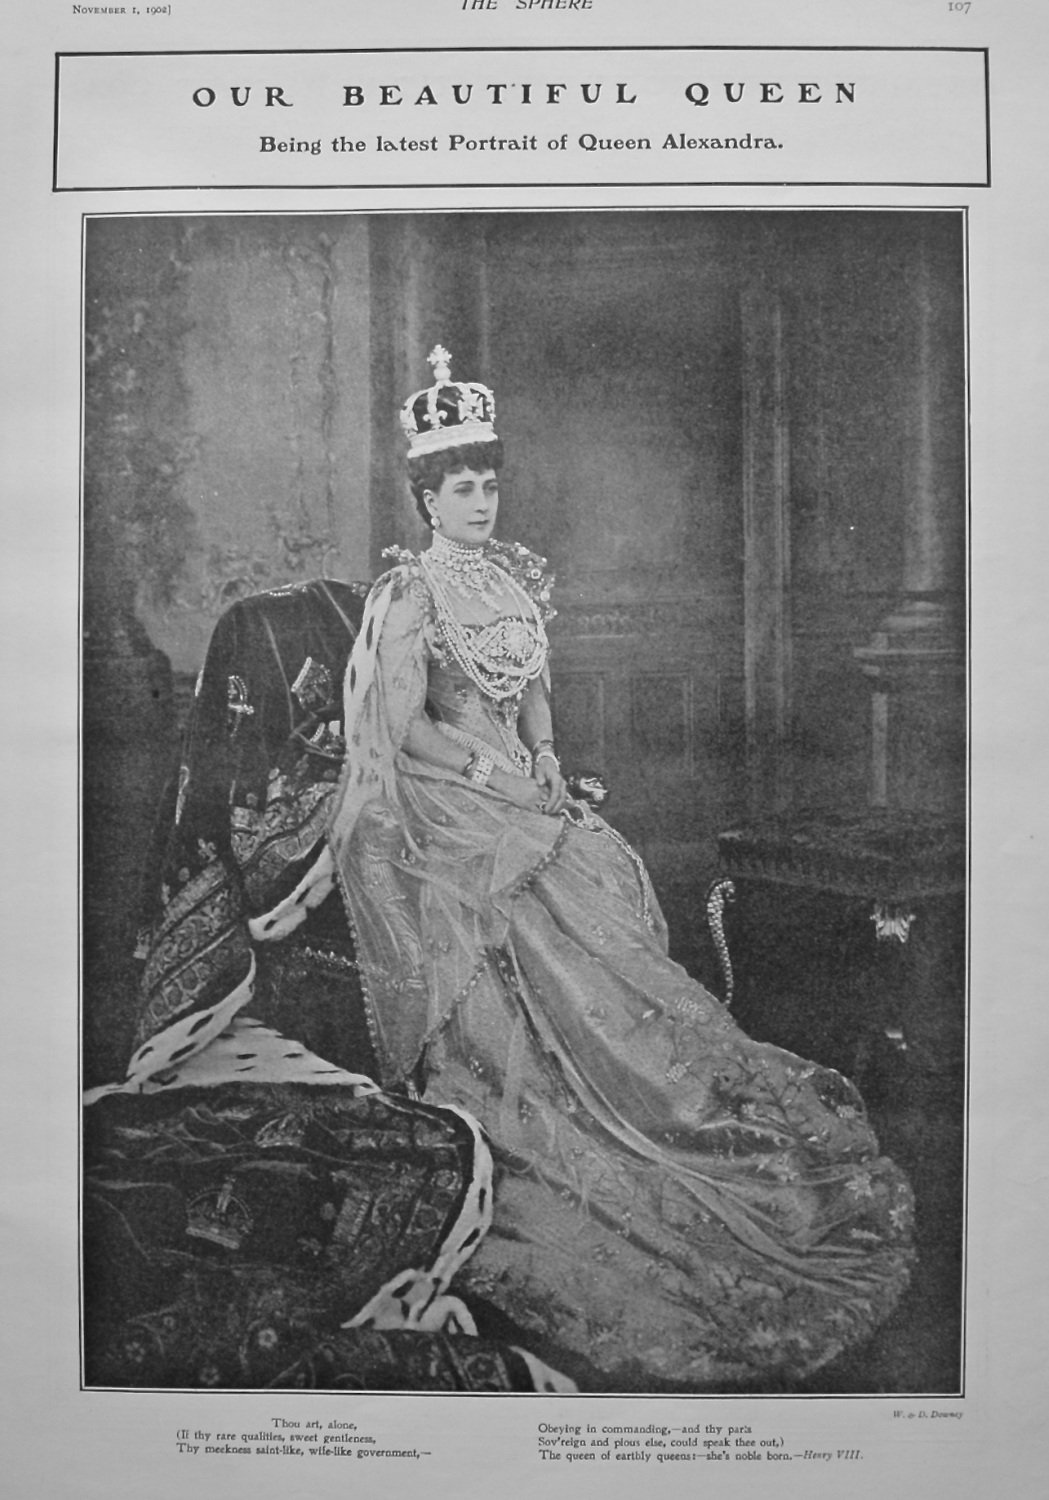 Our Beautiful Queen : Being the Latest Portrait of Queen Alexandra. 1902